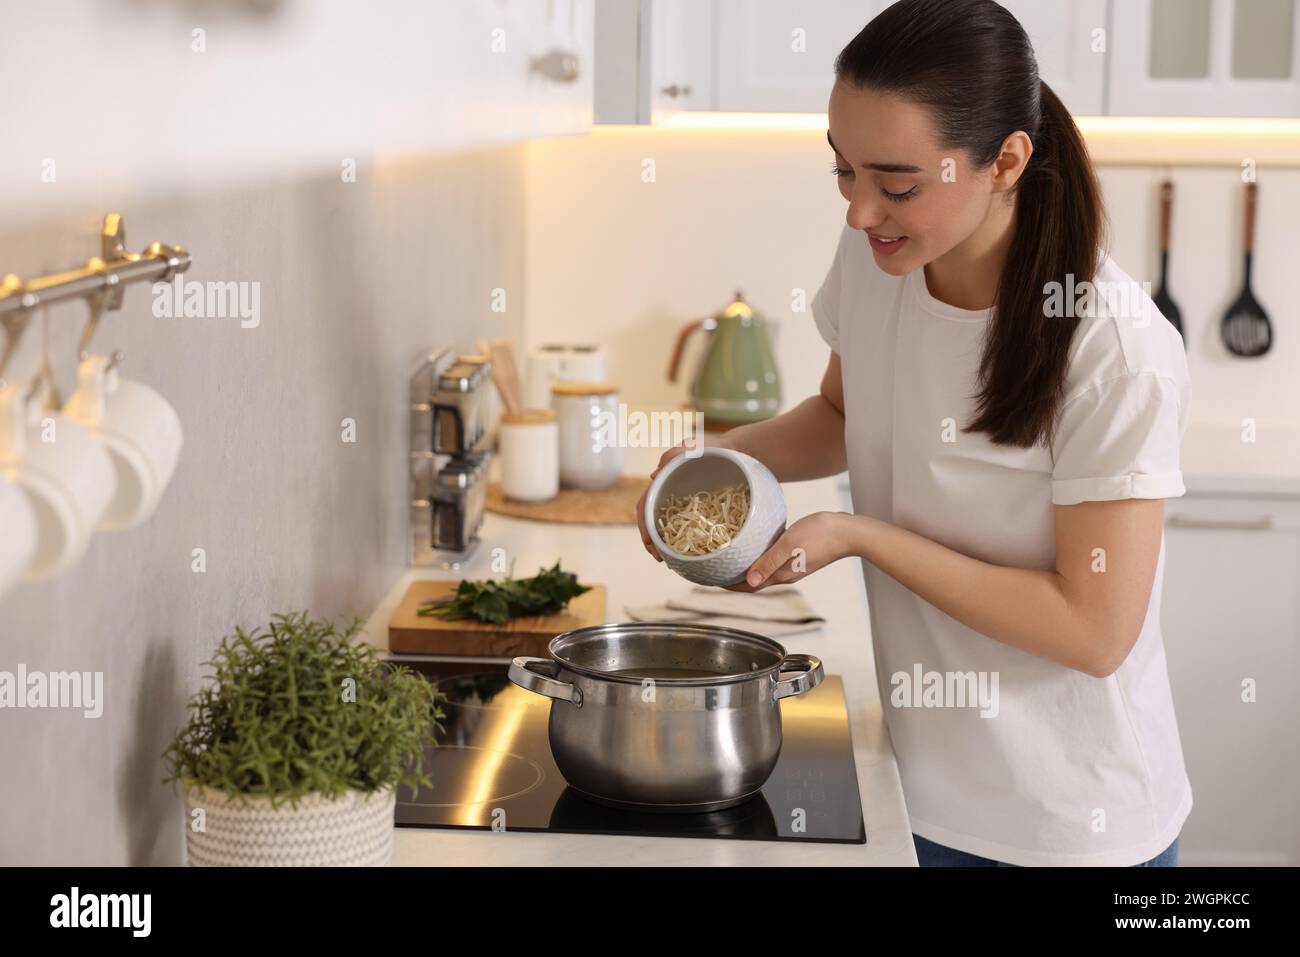 Smiling woman adding noodles into pot with soup in kitchen Stock Photo